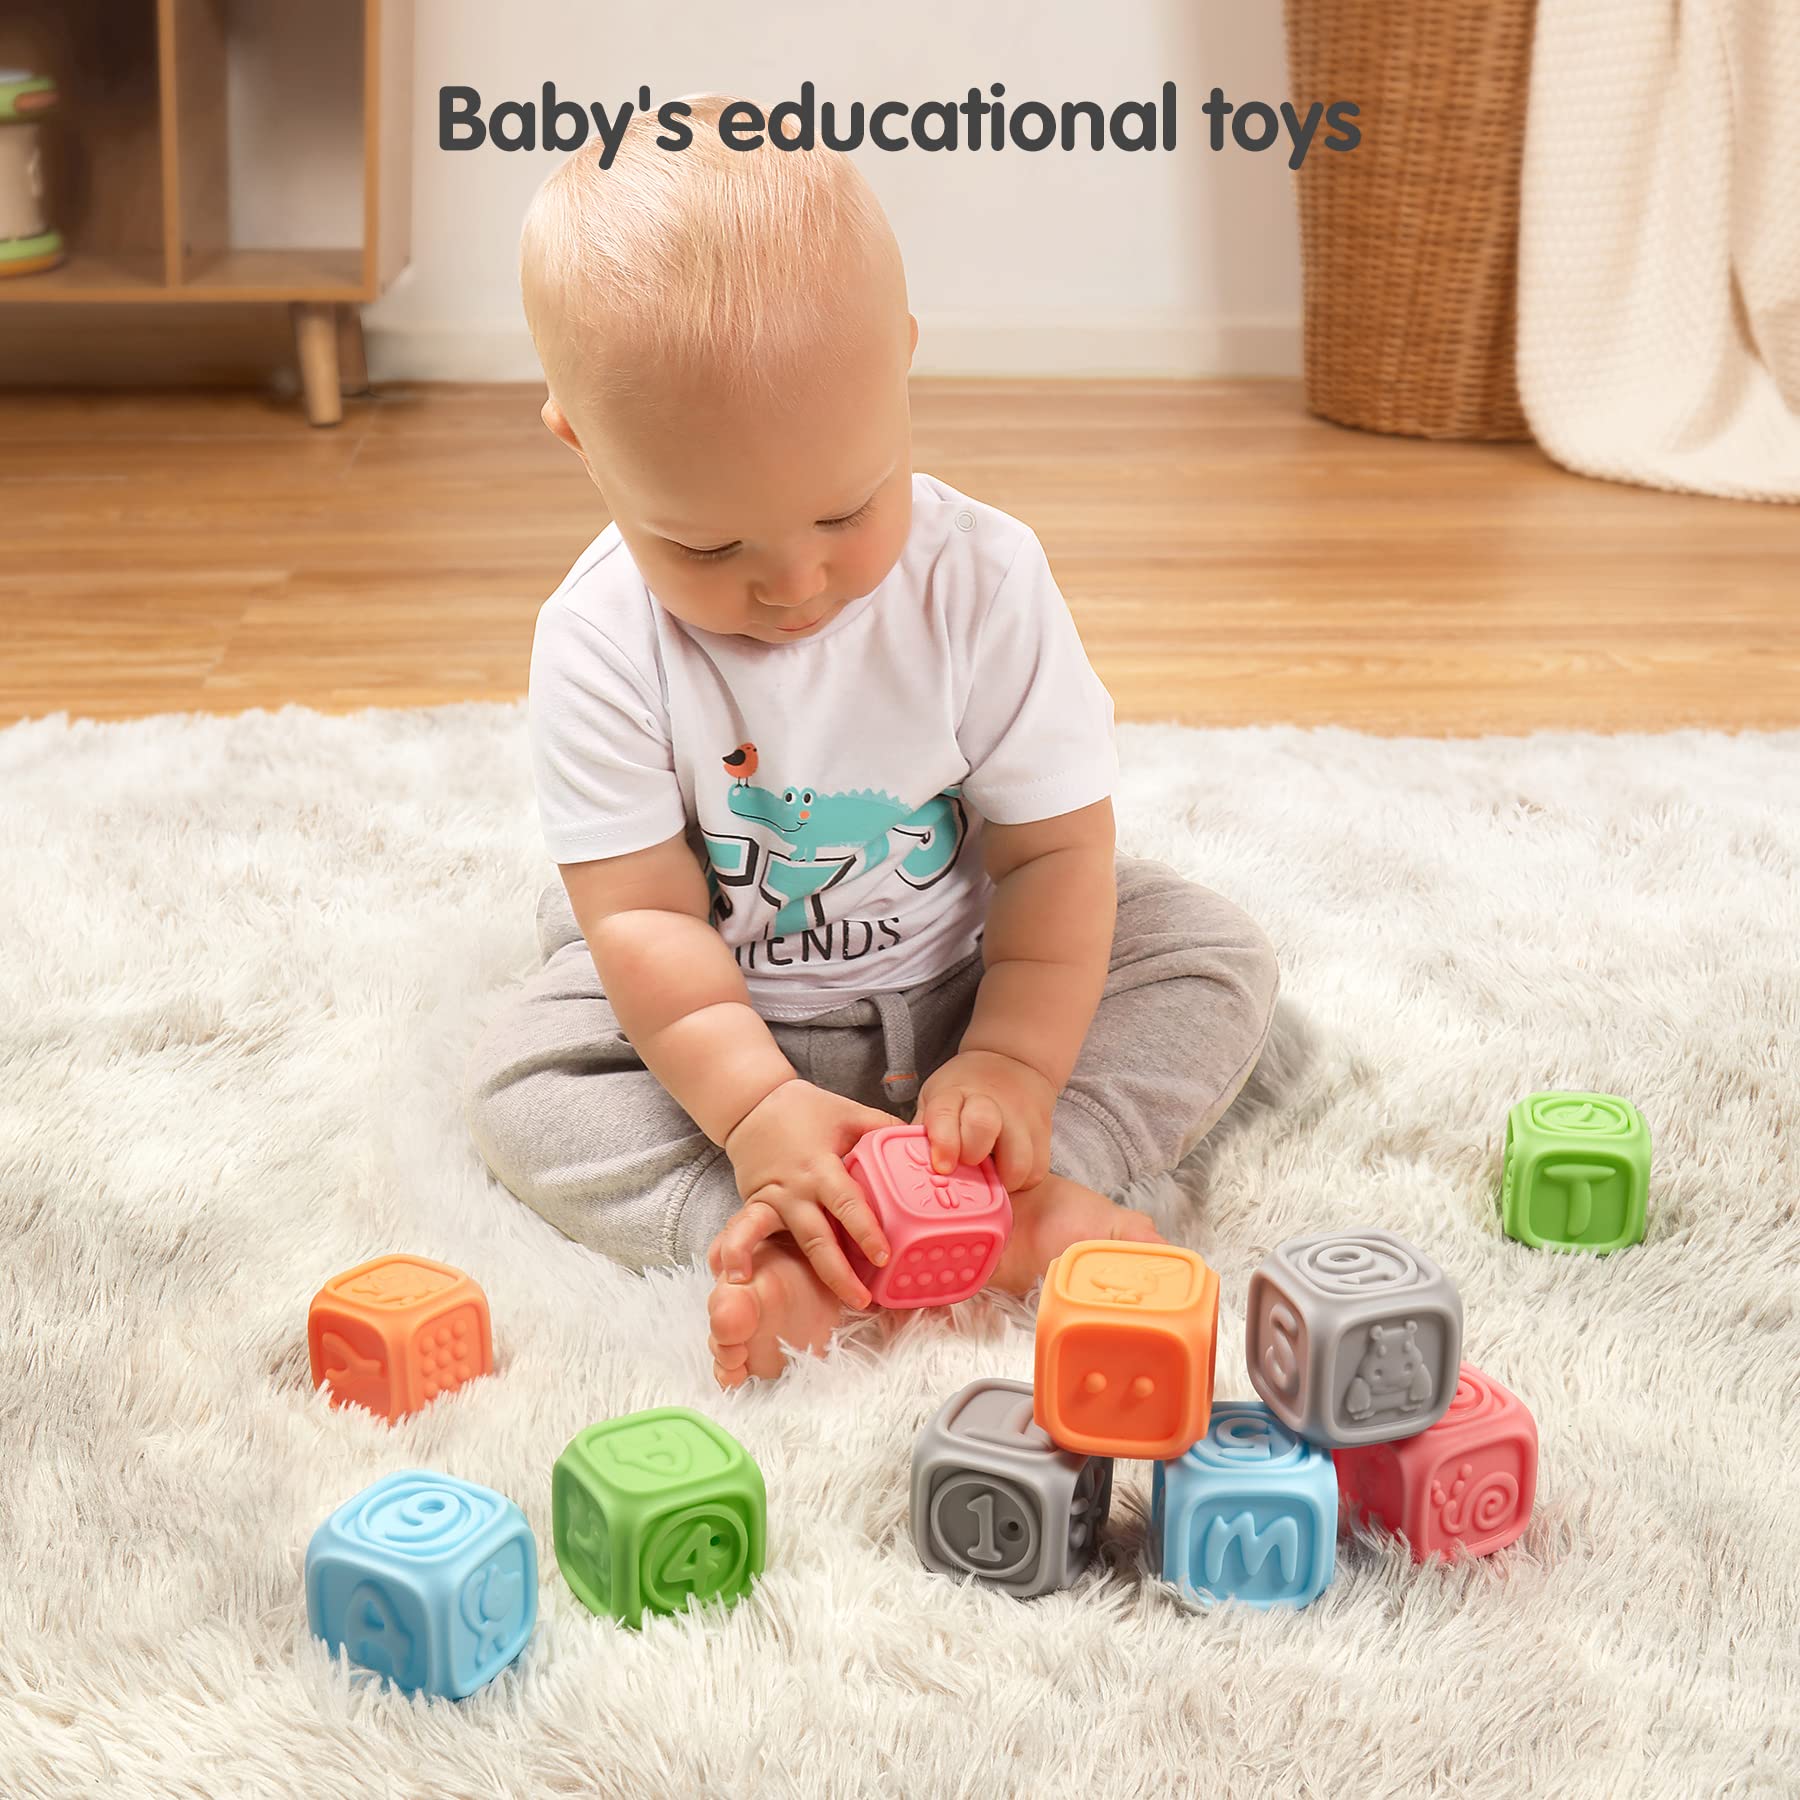 TUMAMA Baby Blocks,Soft Baby Building Blocks for Toddlers,Chewing Toys Educational Baby Bath Toys Play with Numbers, Shapes, Animals,Letters for 0-3 Years